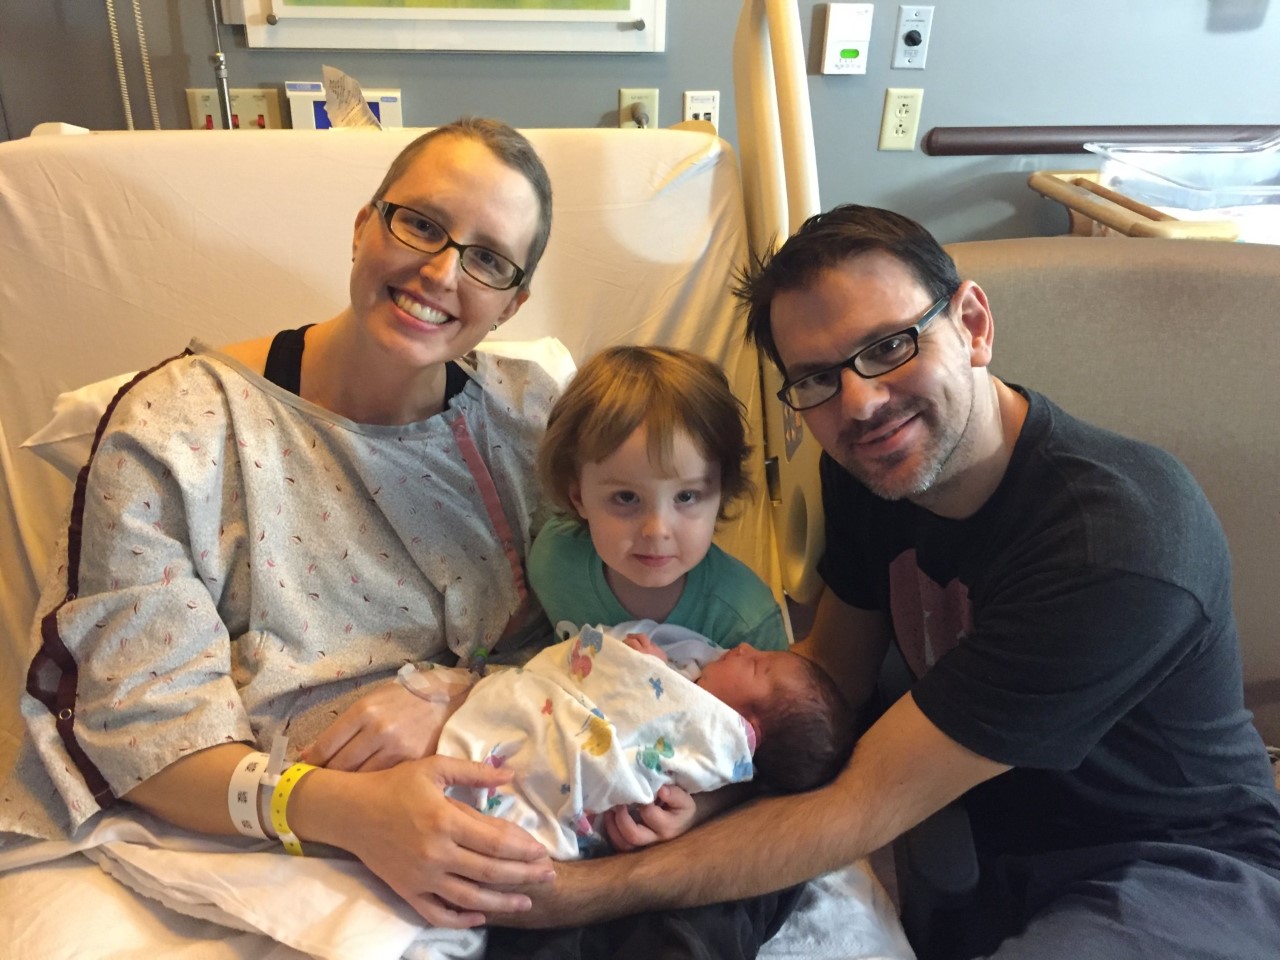 Laura Grable, her husband, and son holding newborn baby